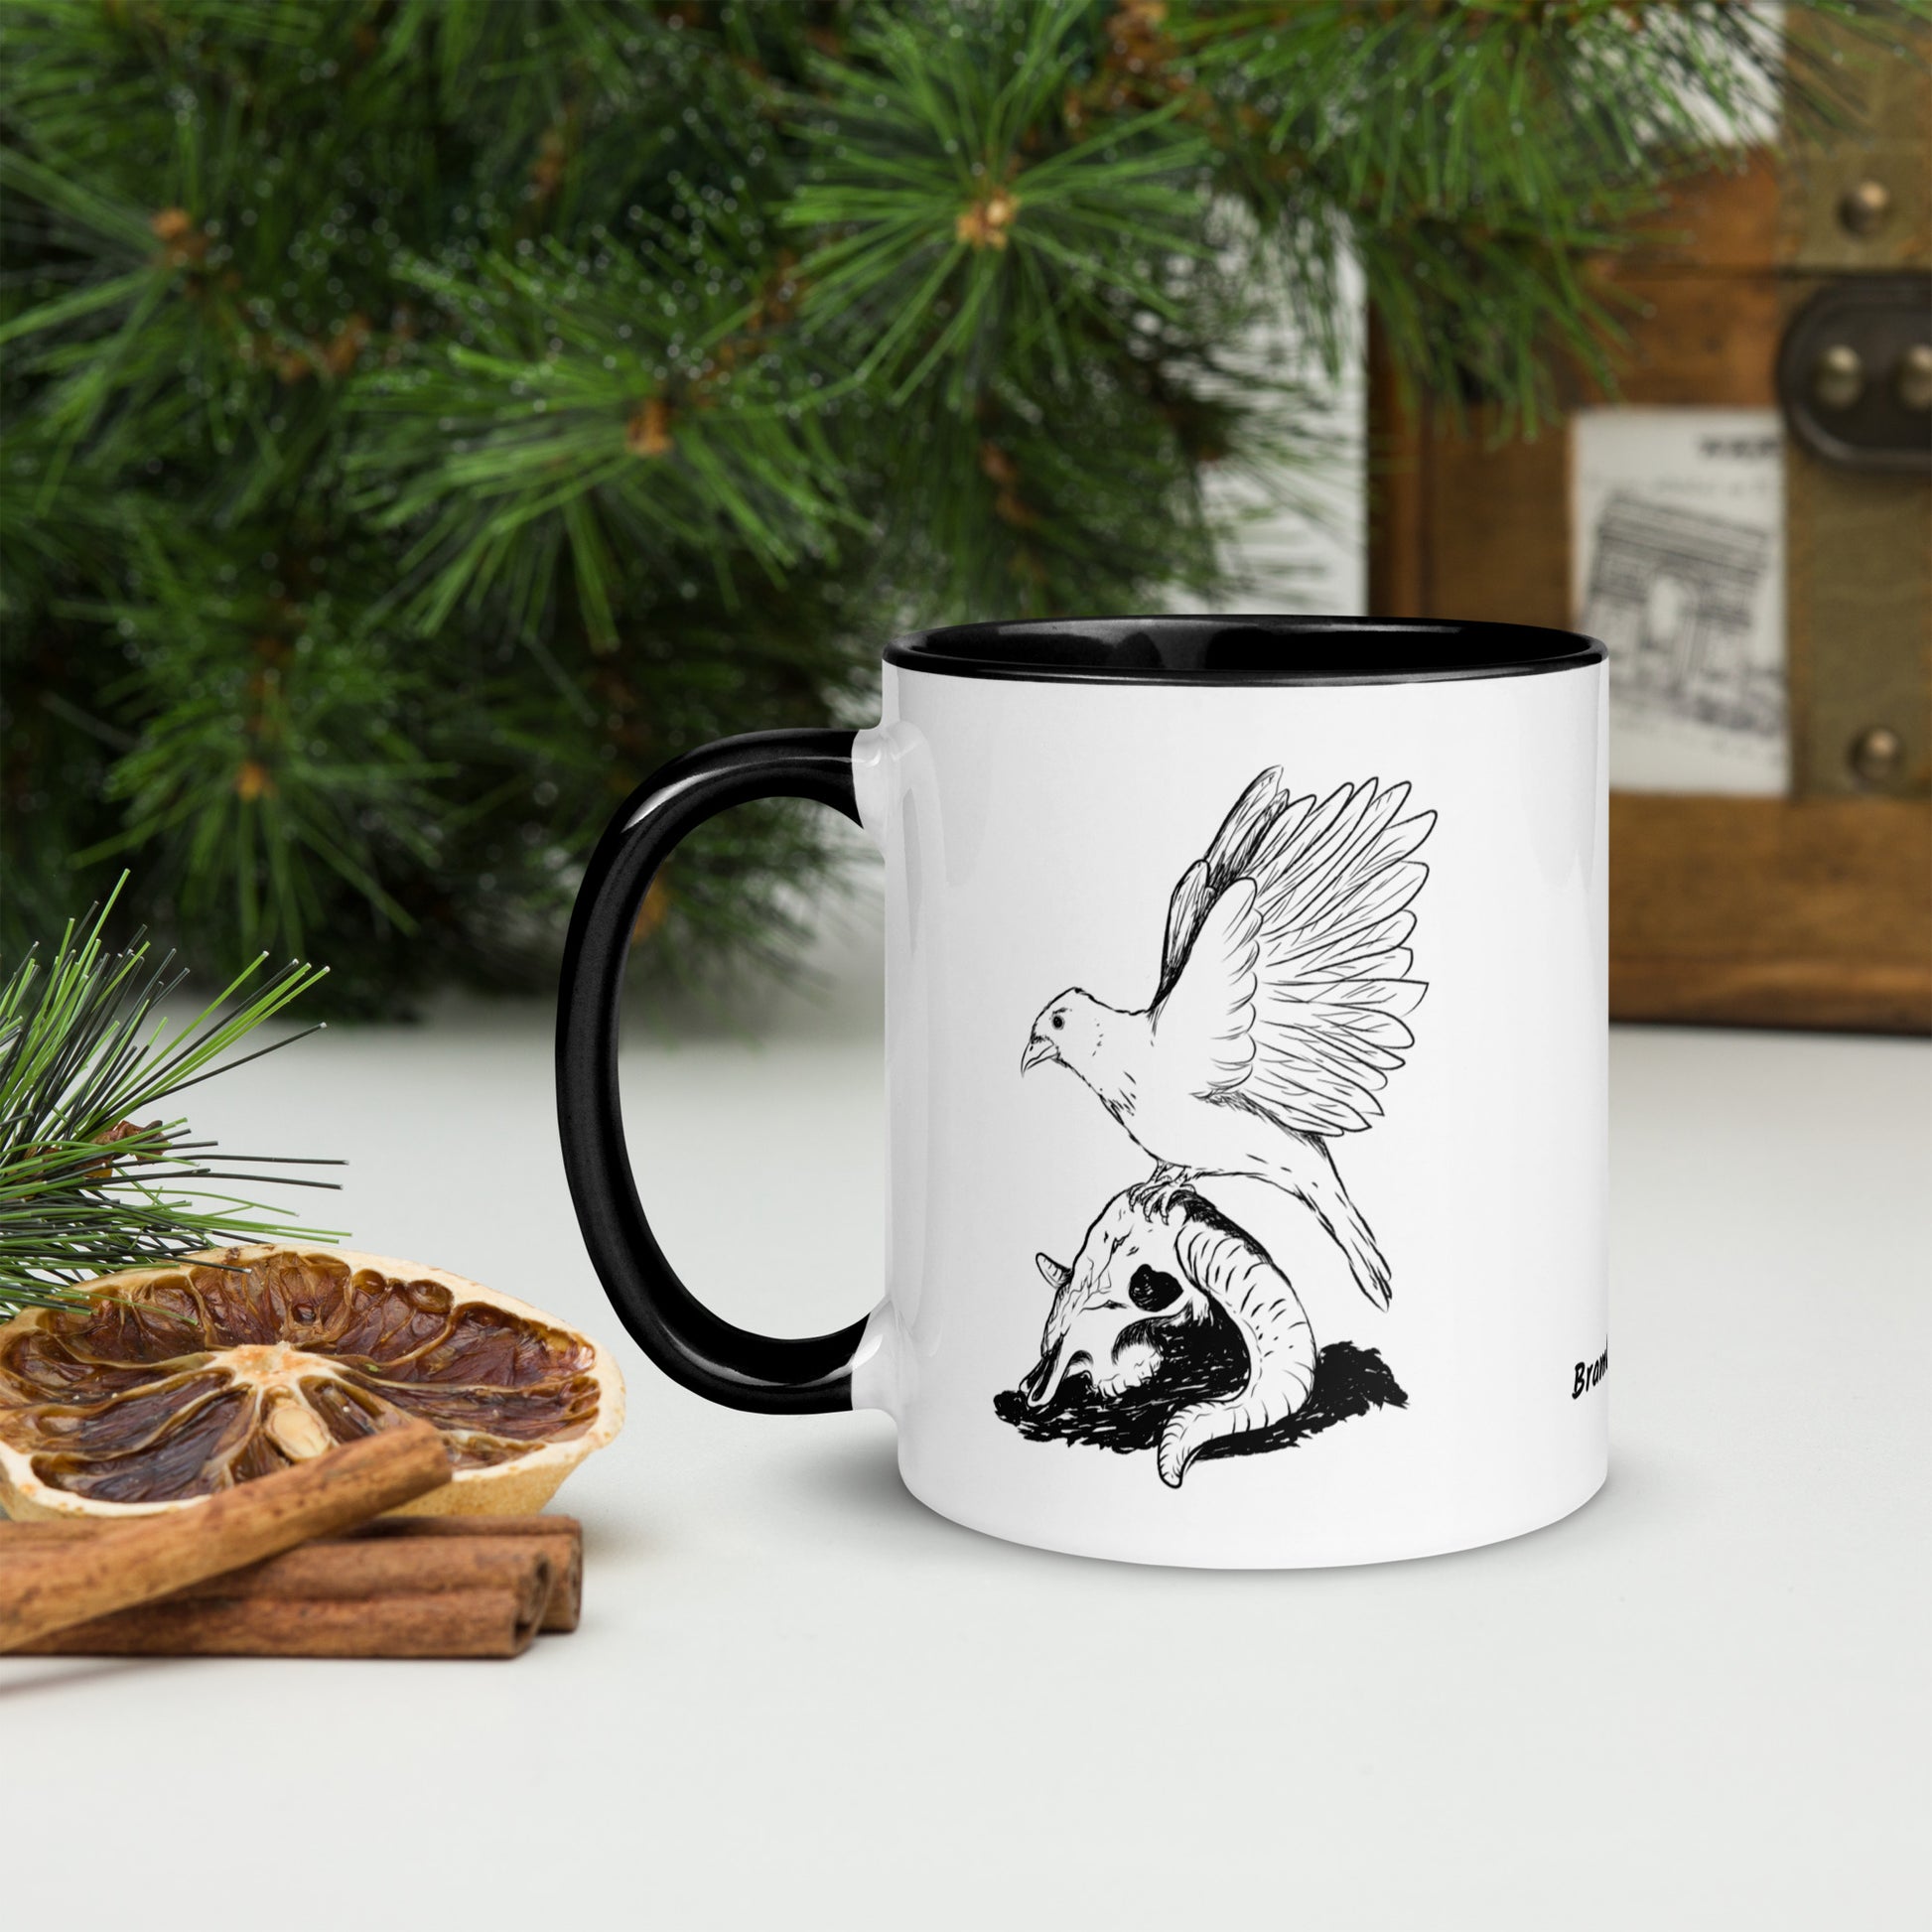 11 ounce white ceramic mug with black handle and inside. Features a double sided print of Reflections, a design with a crow sitting on a sheep skull. Dishwasher and microwave safe. Shown by dried citrus and pine boughs.